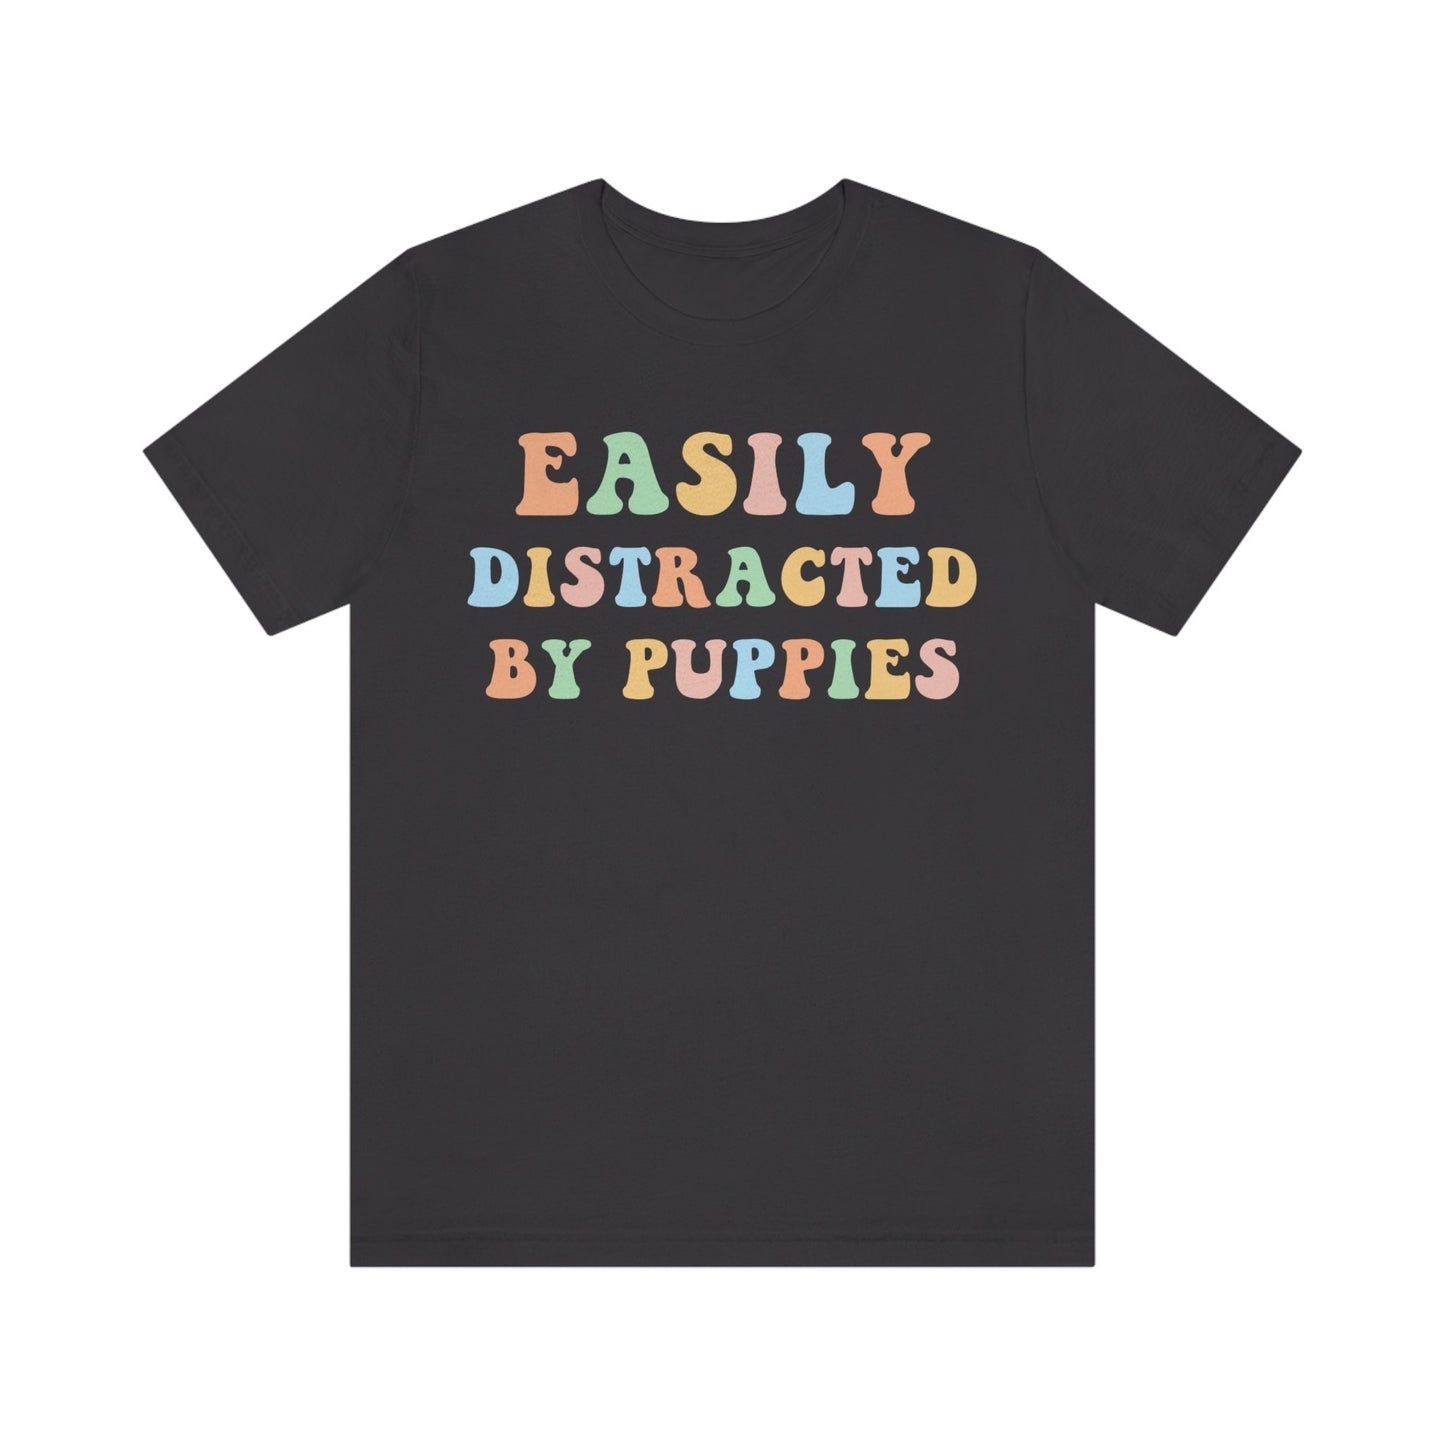 Easily Distracted by Puppies gift t-shirt for Dog Owners, Cute Dog Lover t-shirt - 37 Design Unit